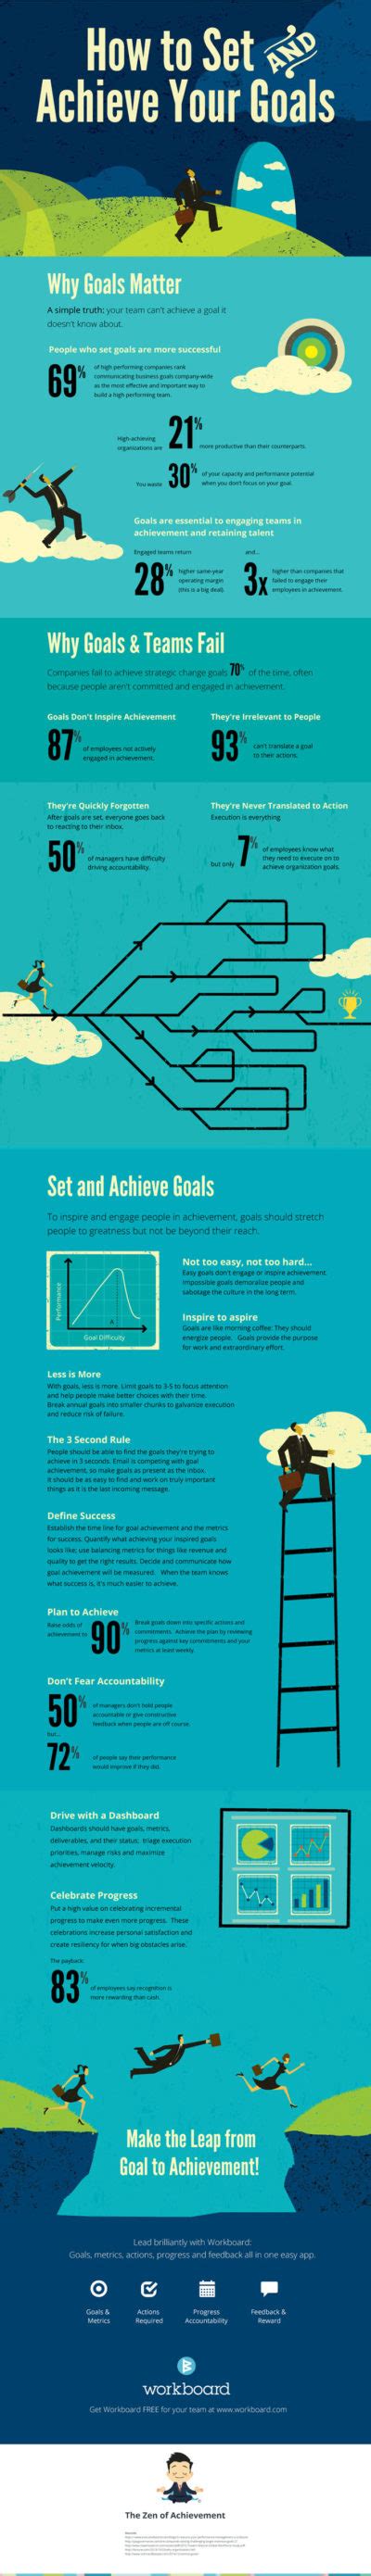 How To Set And Achieve Goals Infographic The Heavy Purse